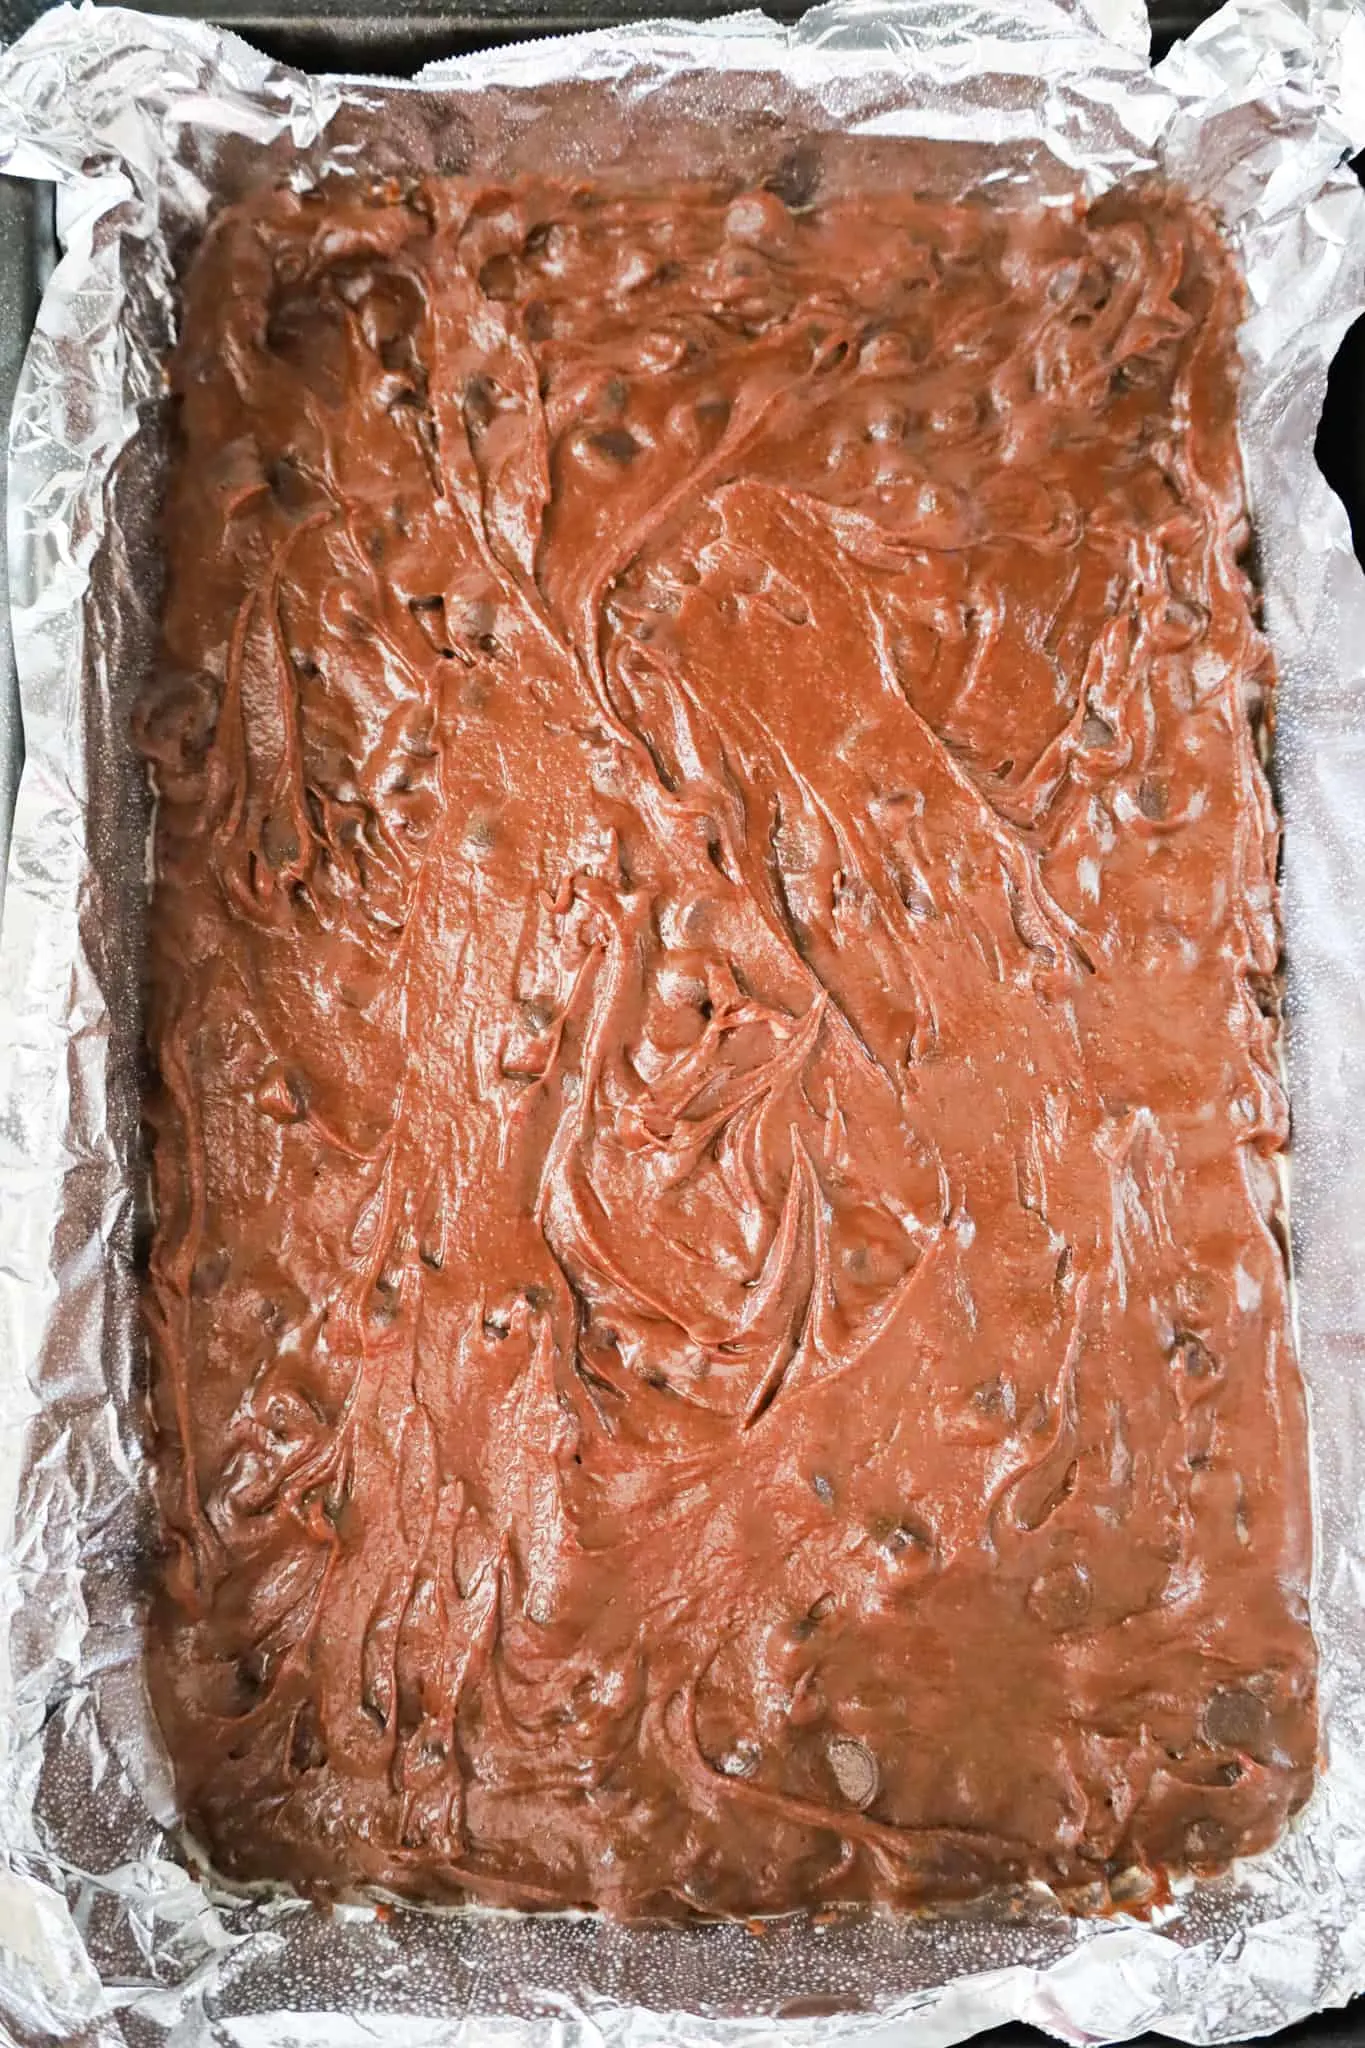 brownie batter in a foil lined baking pan